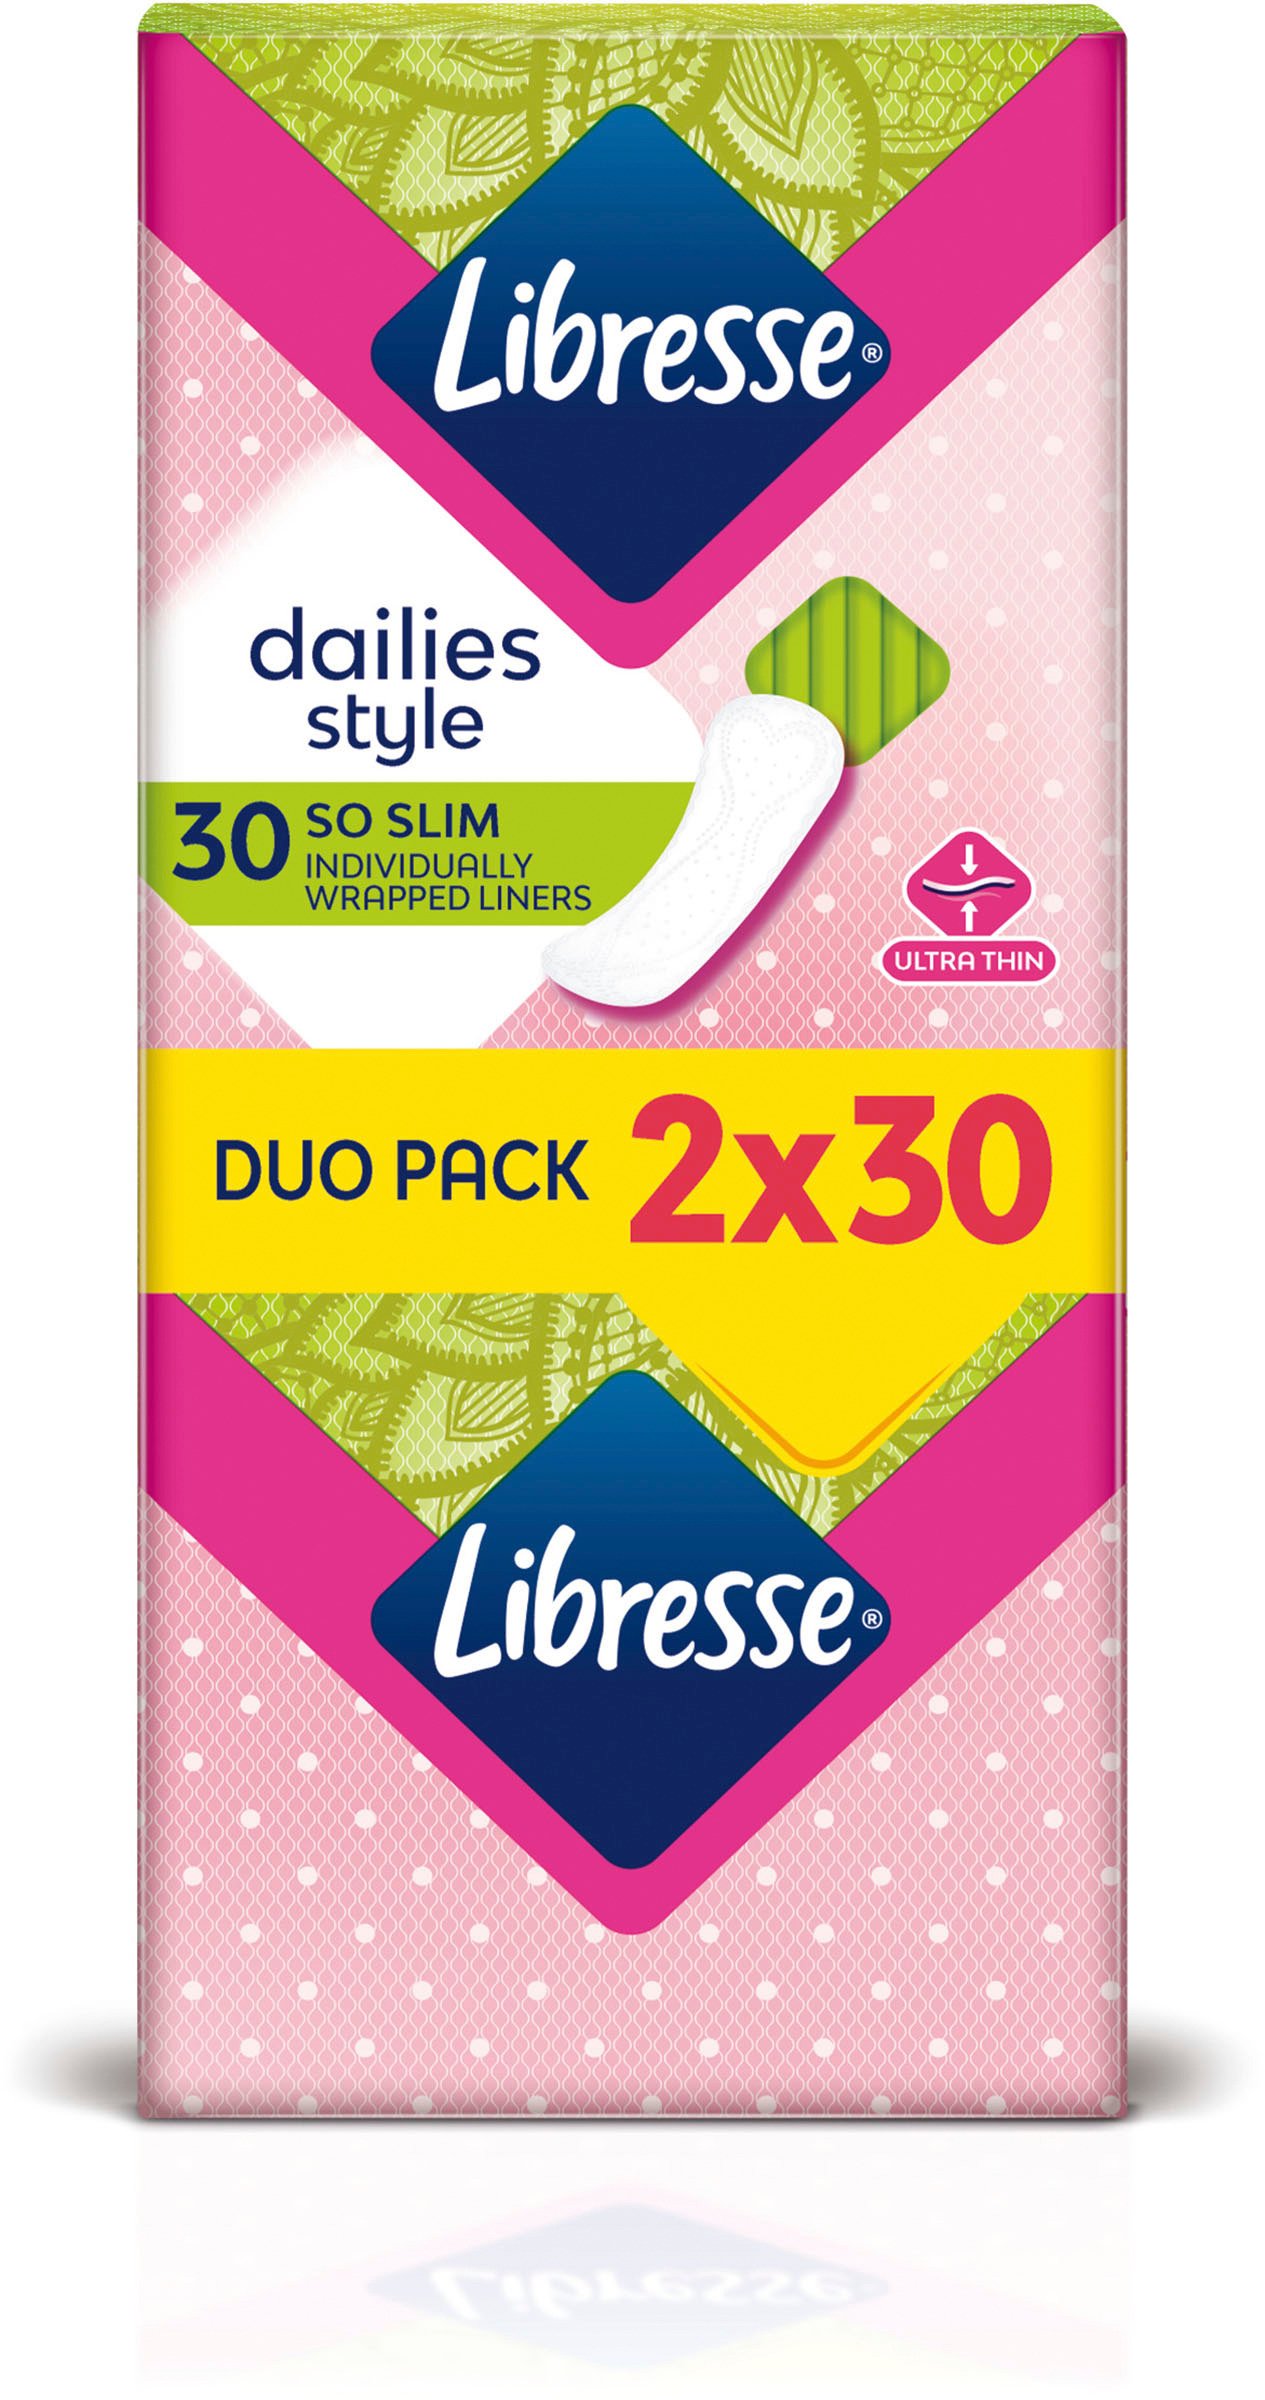 Libresse Dailies Style So Slim Duo Trosskydd 60 st